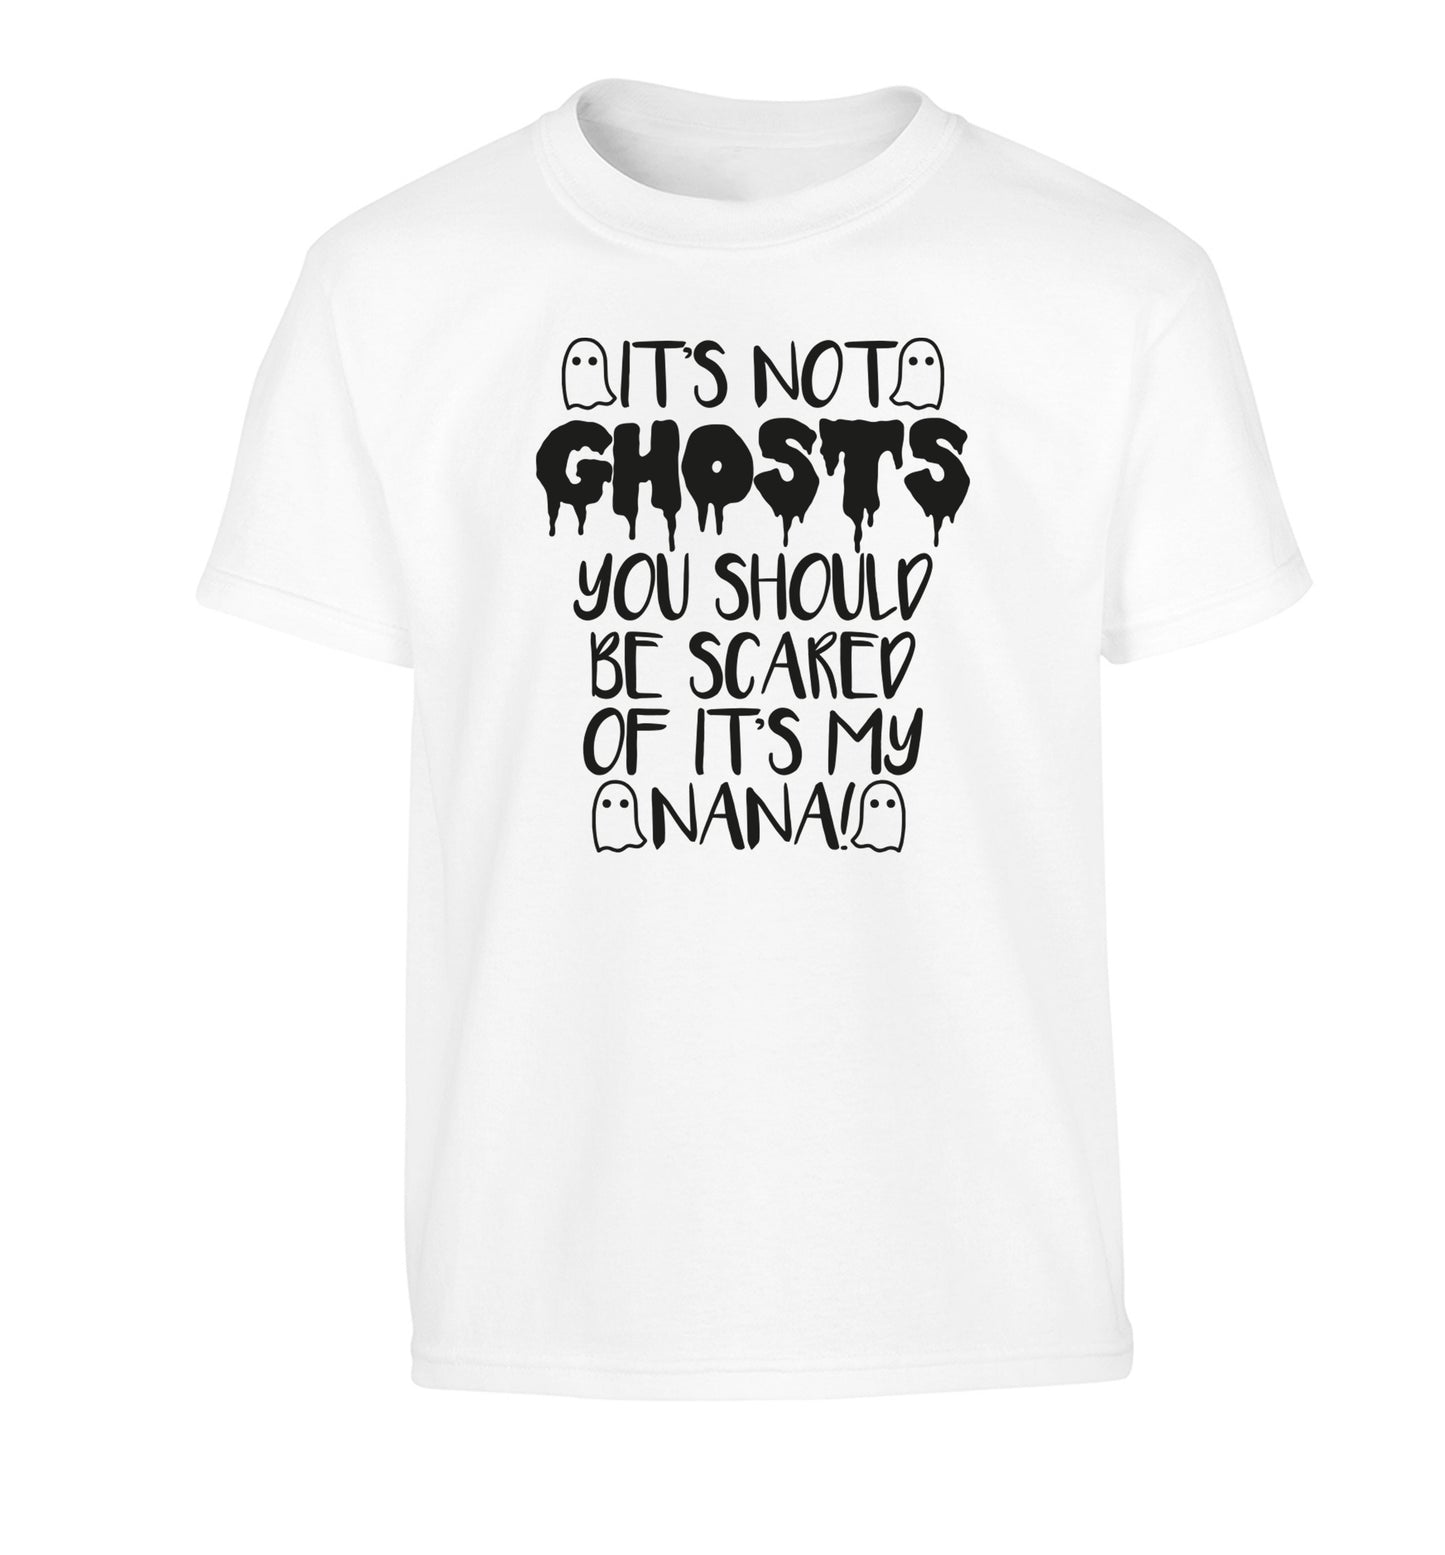 It's not ghosts you should be scared of it's my nana! Children's white Tshirt 12-14 Years